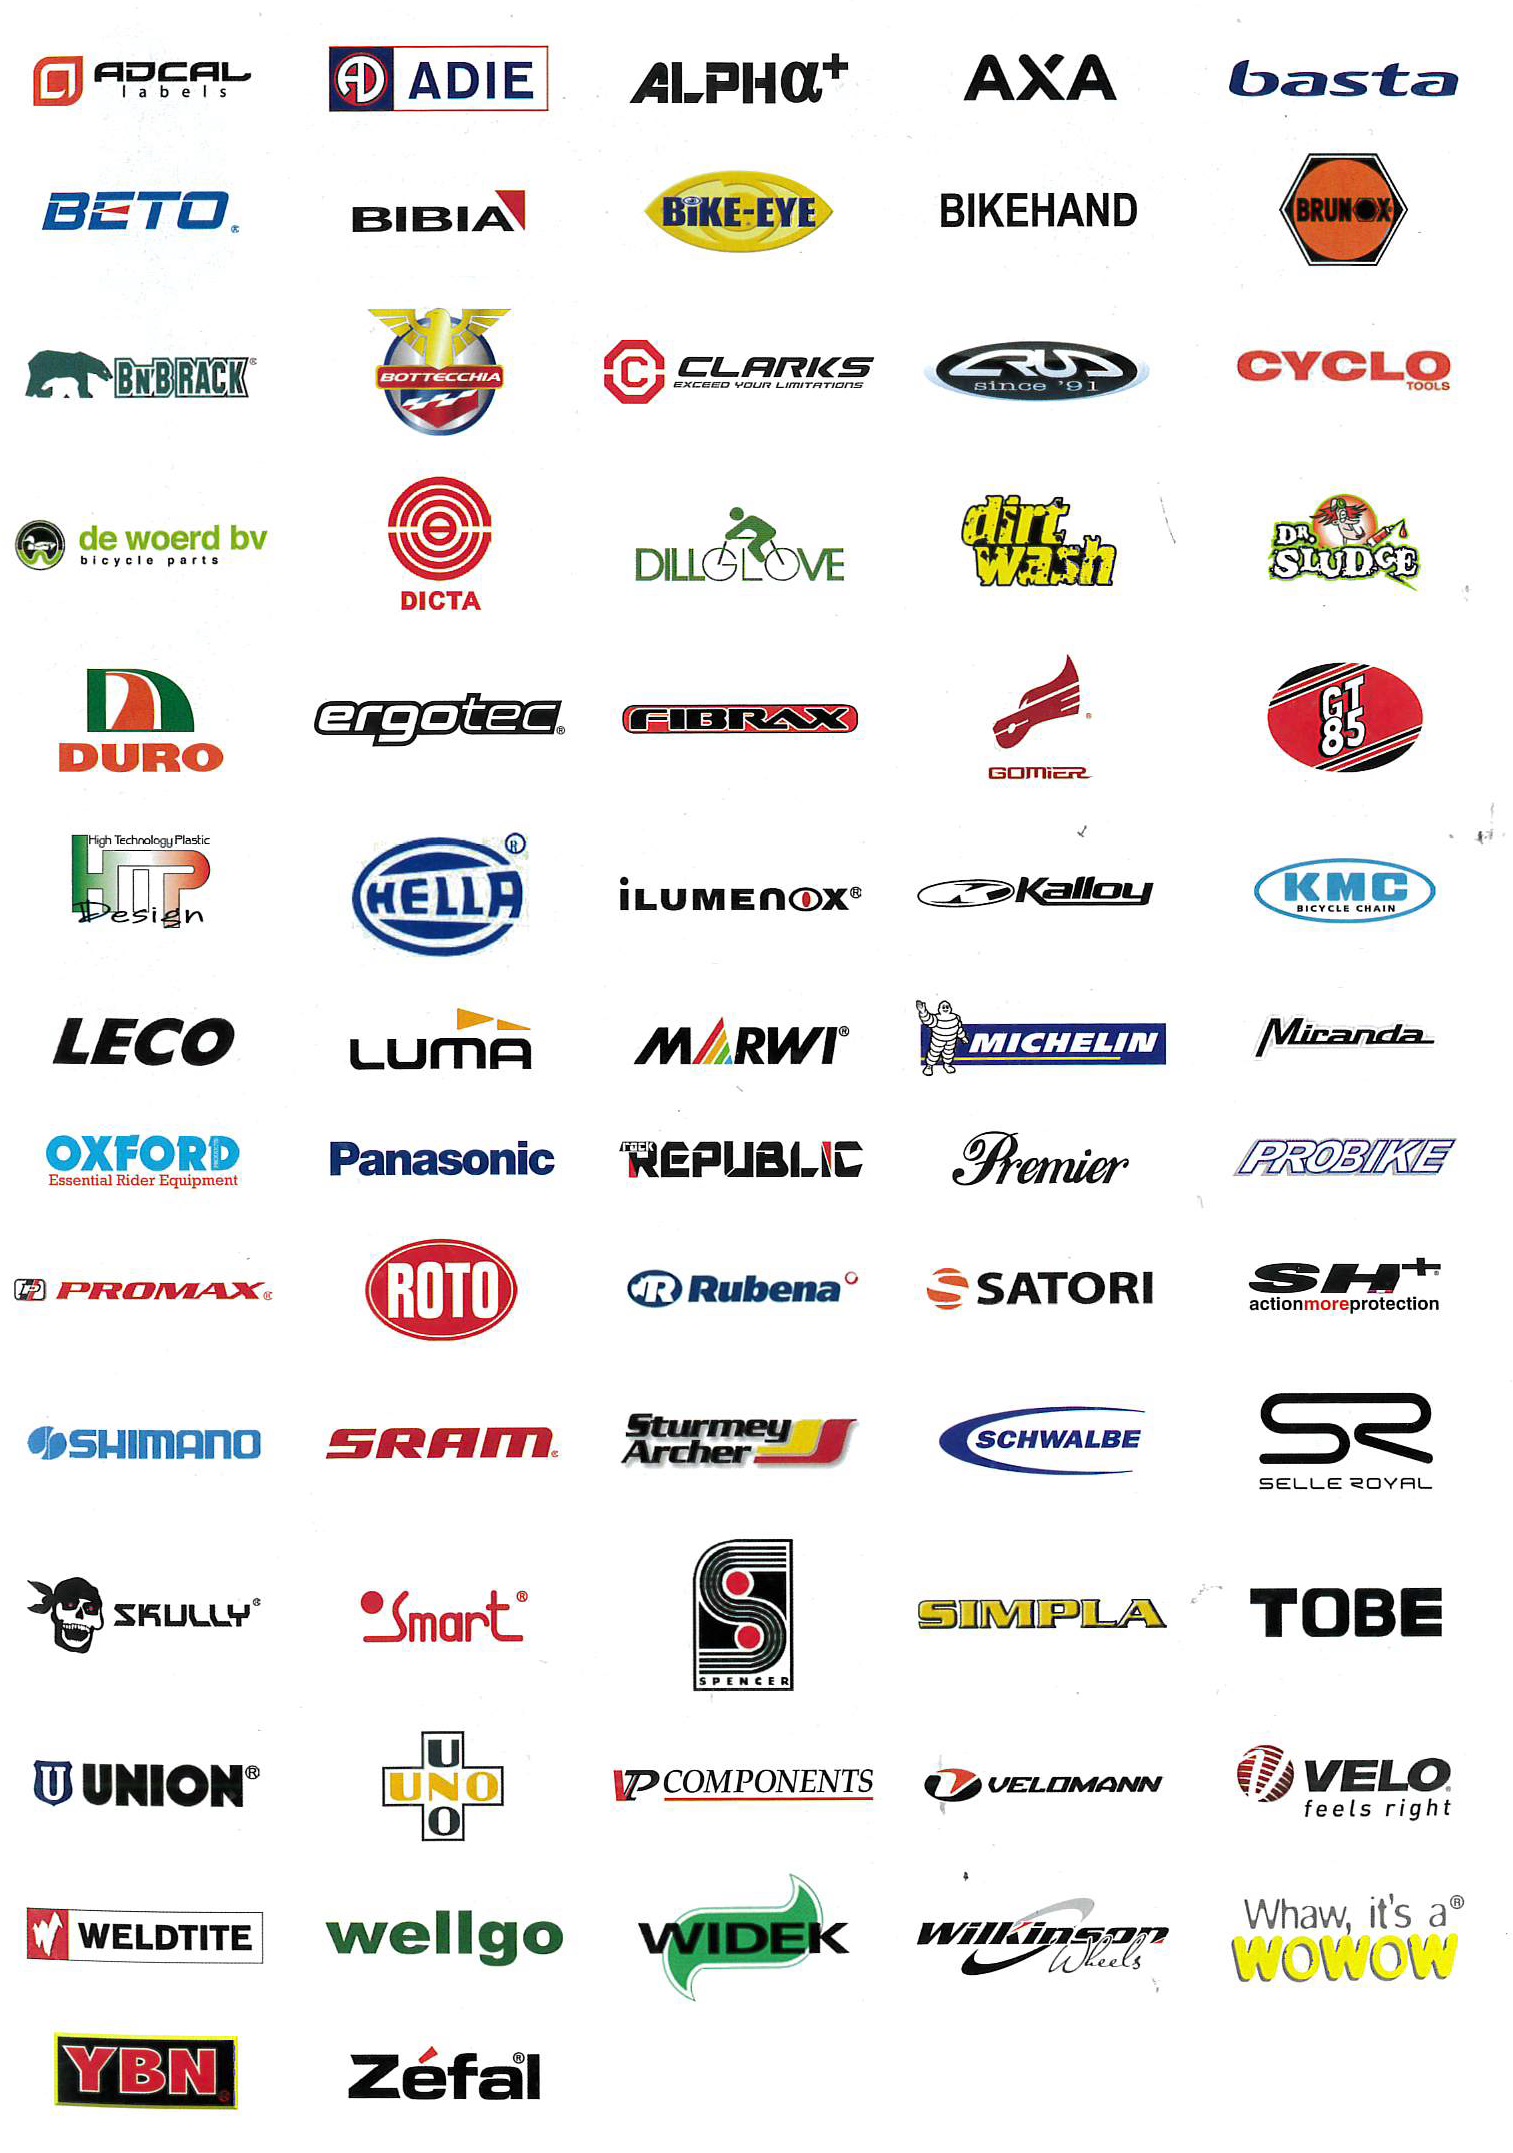 bicycle brands